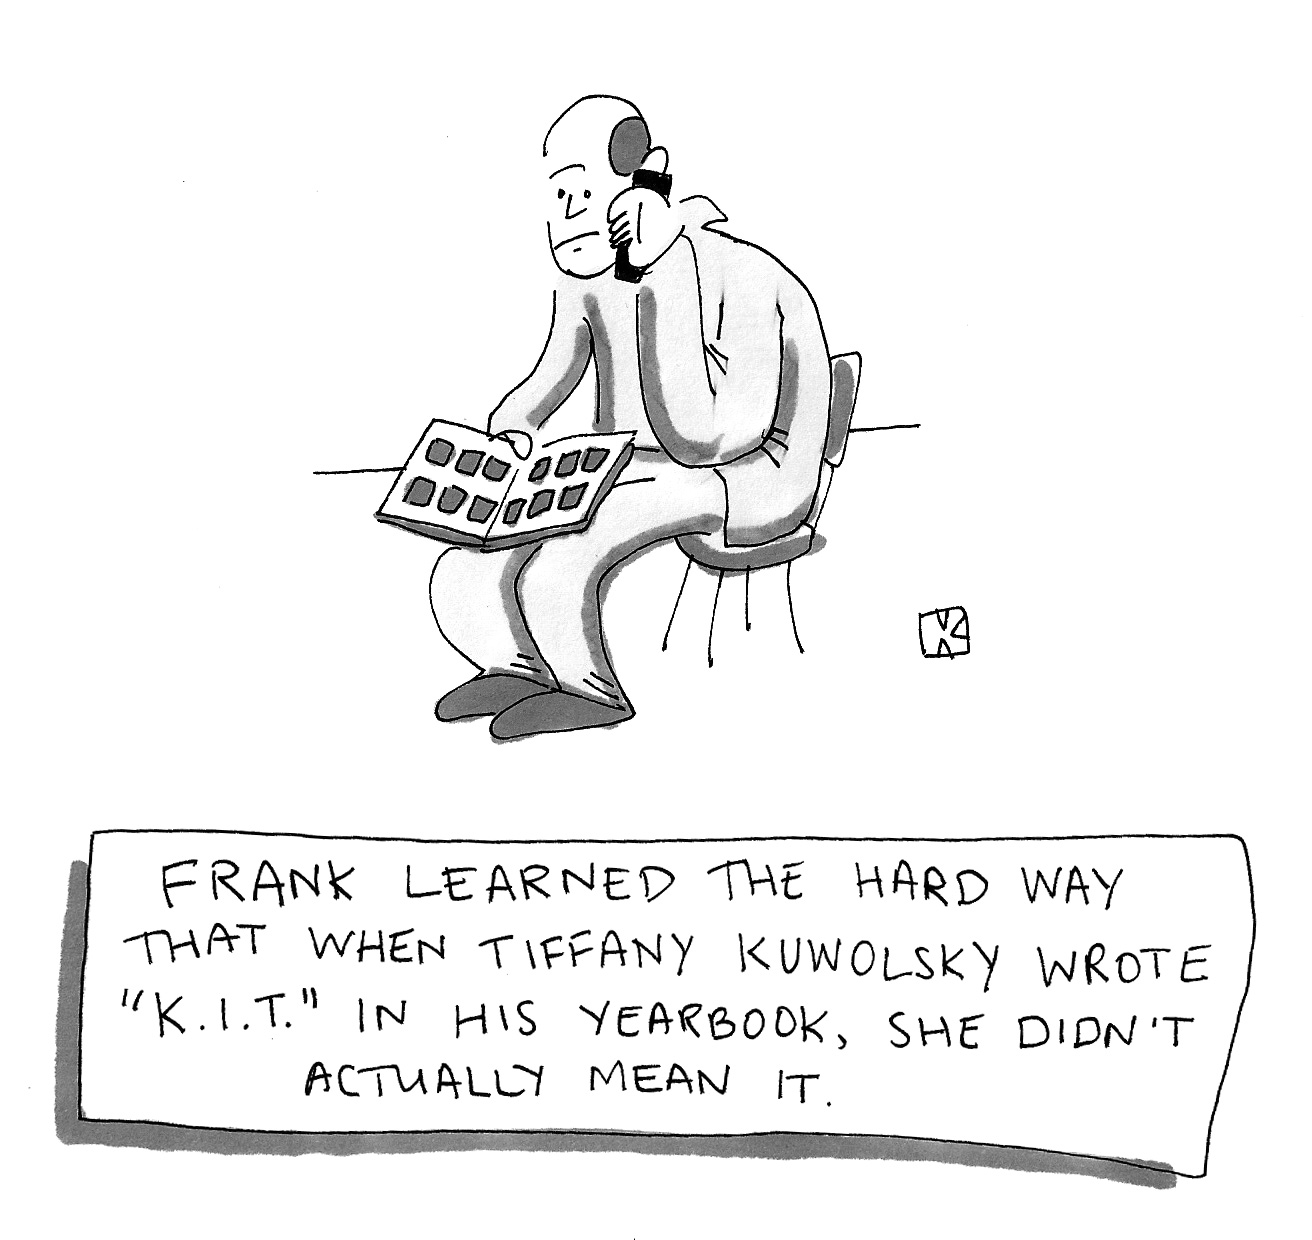 Frank learned the hard way that when Tiffany Kuwolsky wrote 'K.I.T.' in his yearbook, she didn't actually mean it.